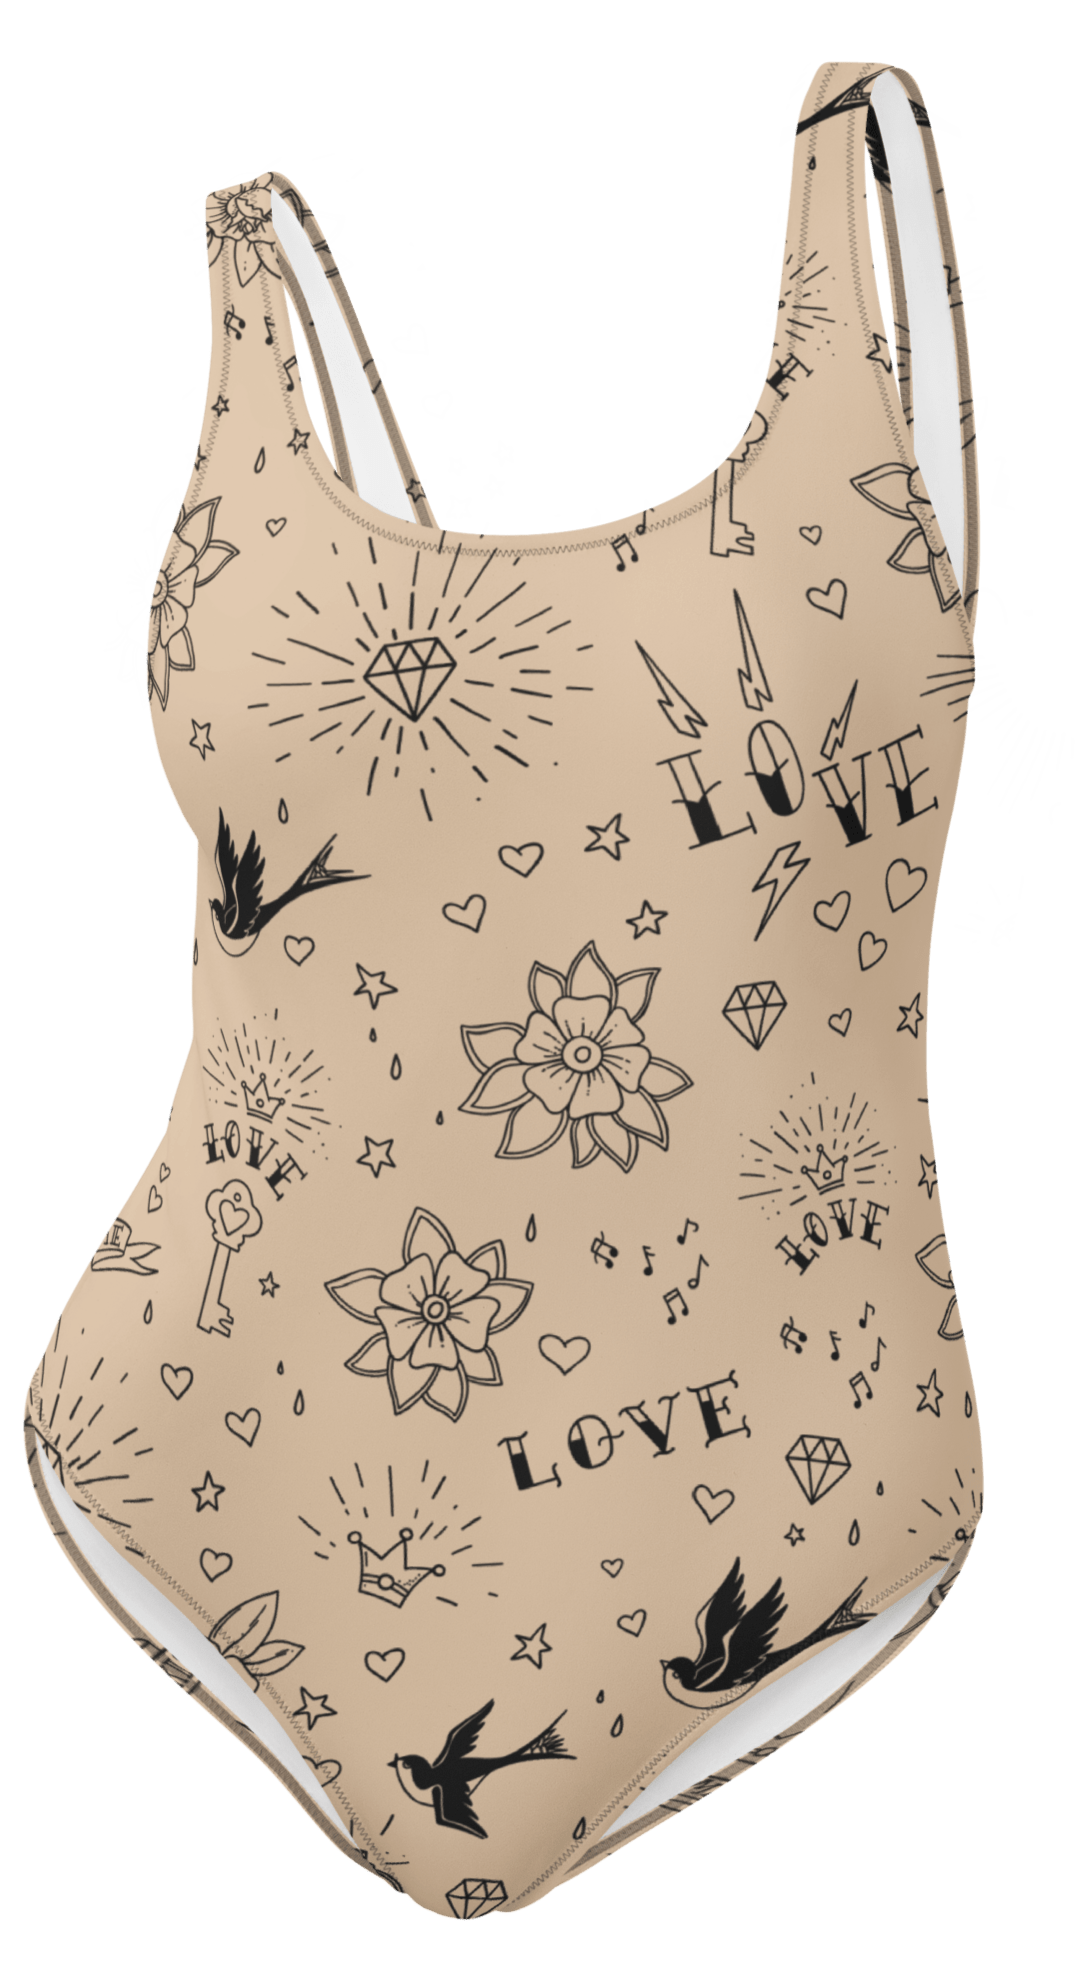 Nude Tattoo One - Piece Swimsuit (Ready to Ship) - Goth Cloth Co.5373487_1203A